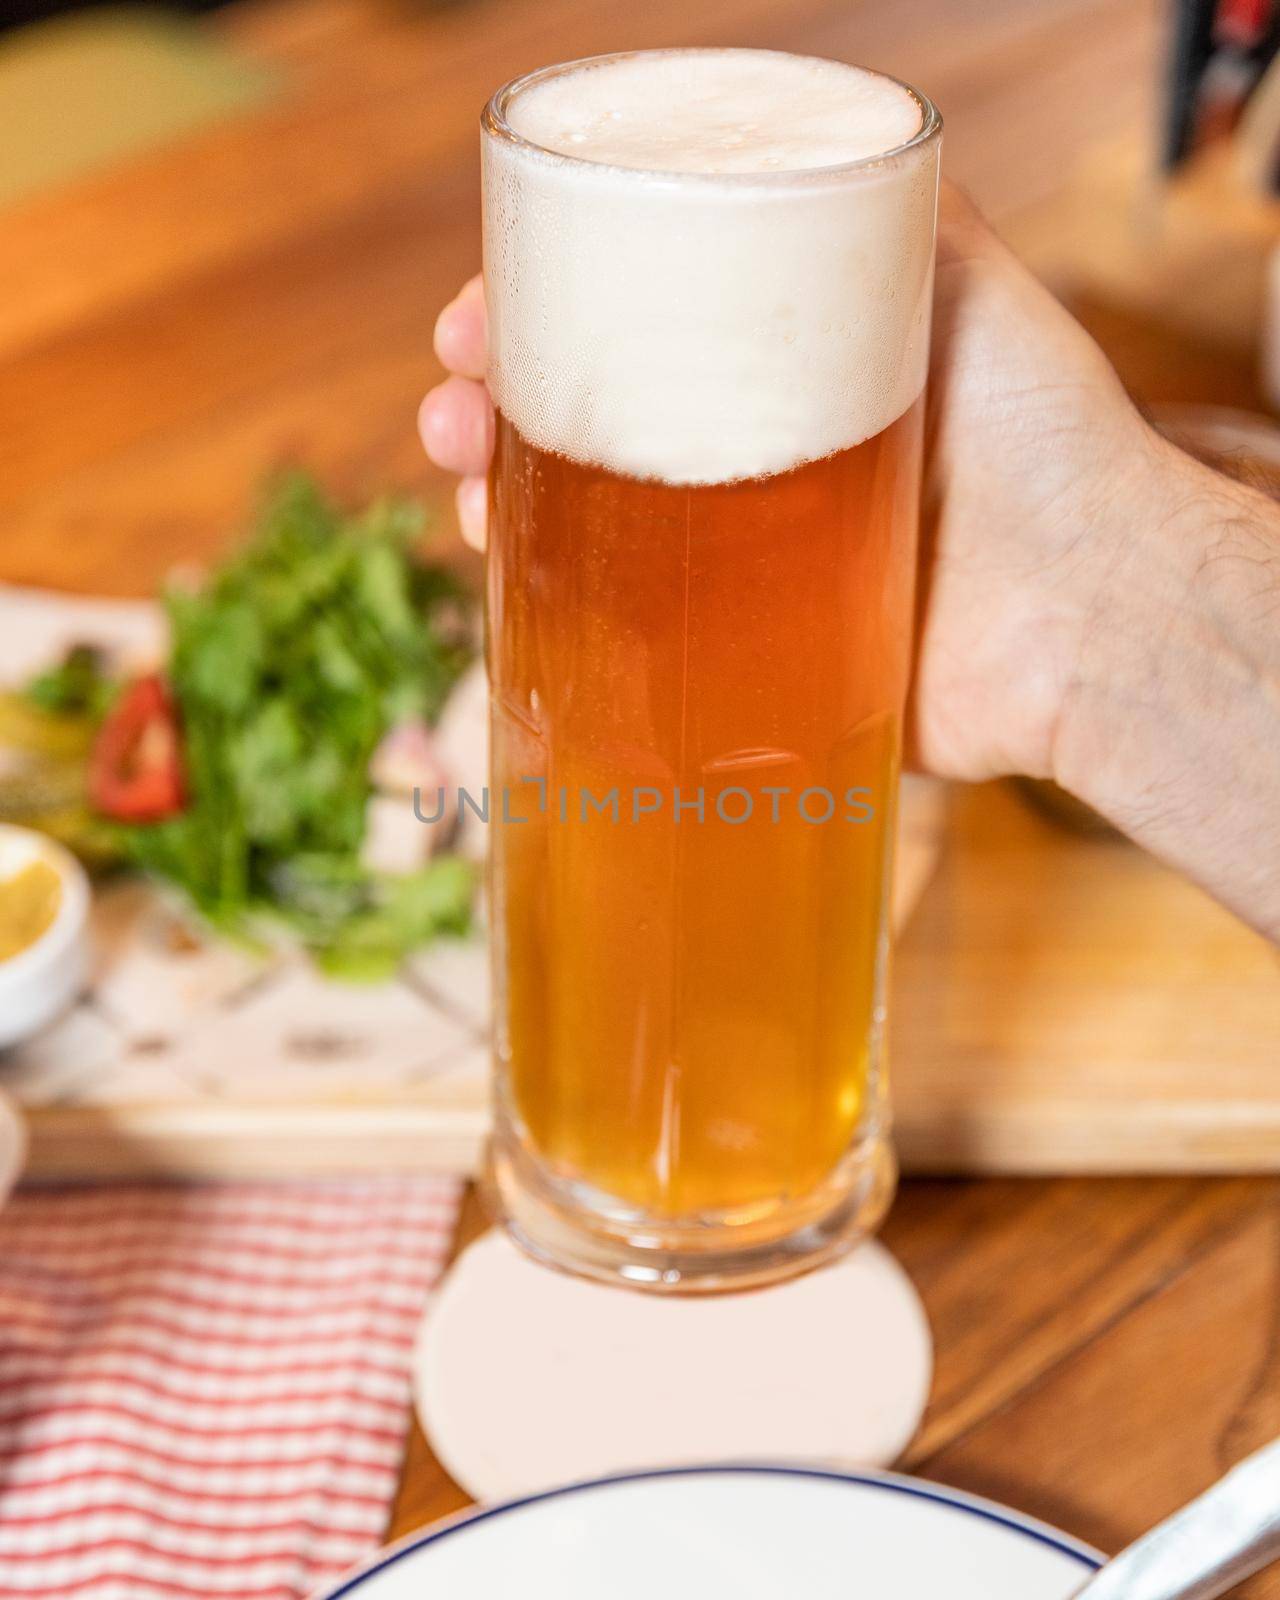 Holding beer drink mug glass, empty place for logo, name